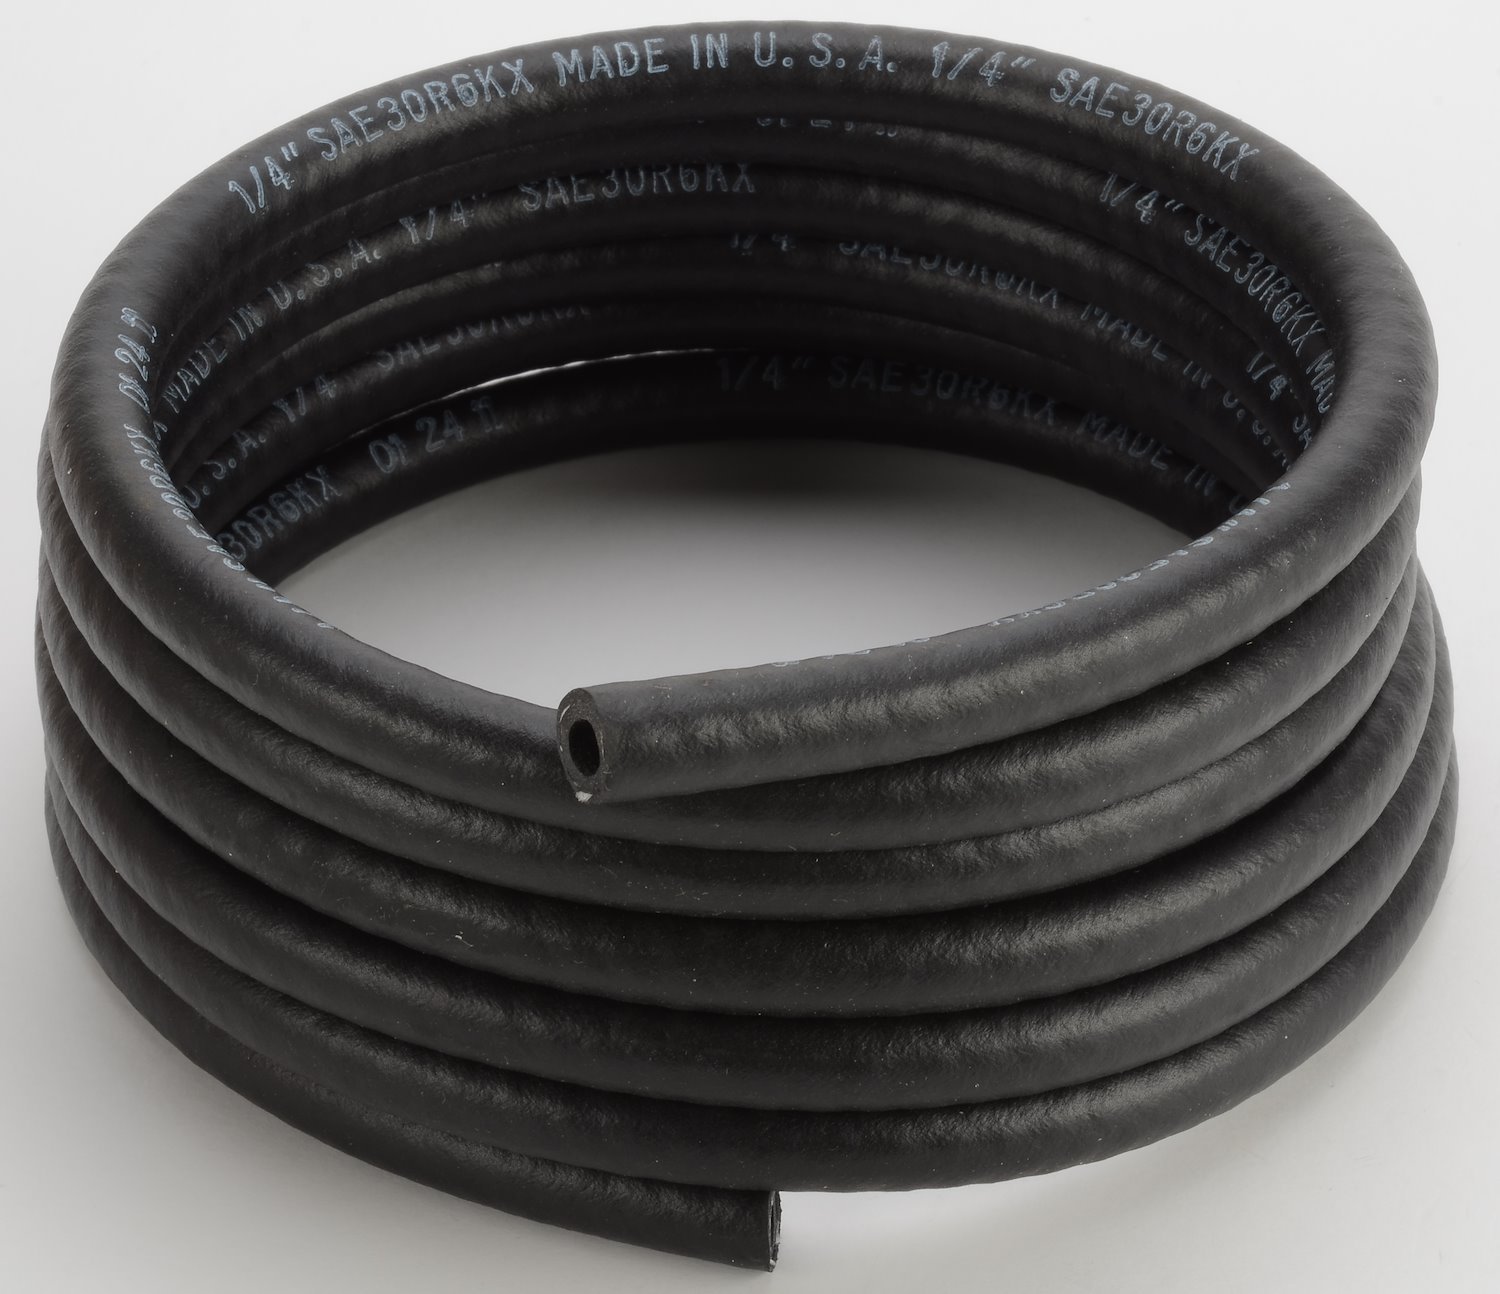 Universal Fuel Hose [1/4 in. I.D. x 10 ft.]